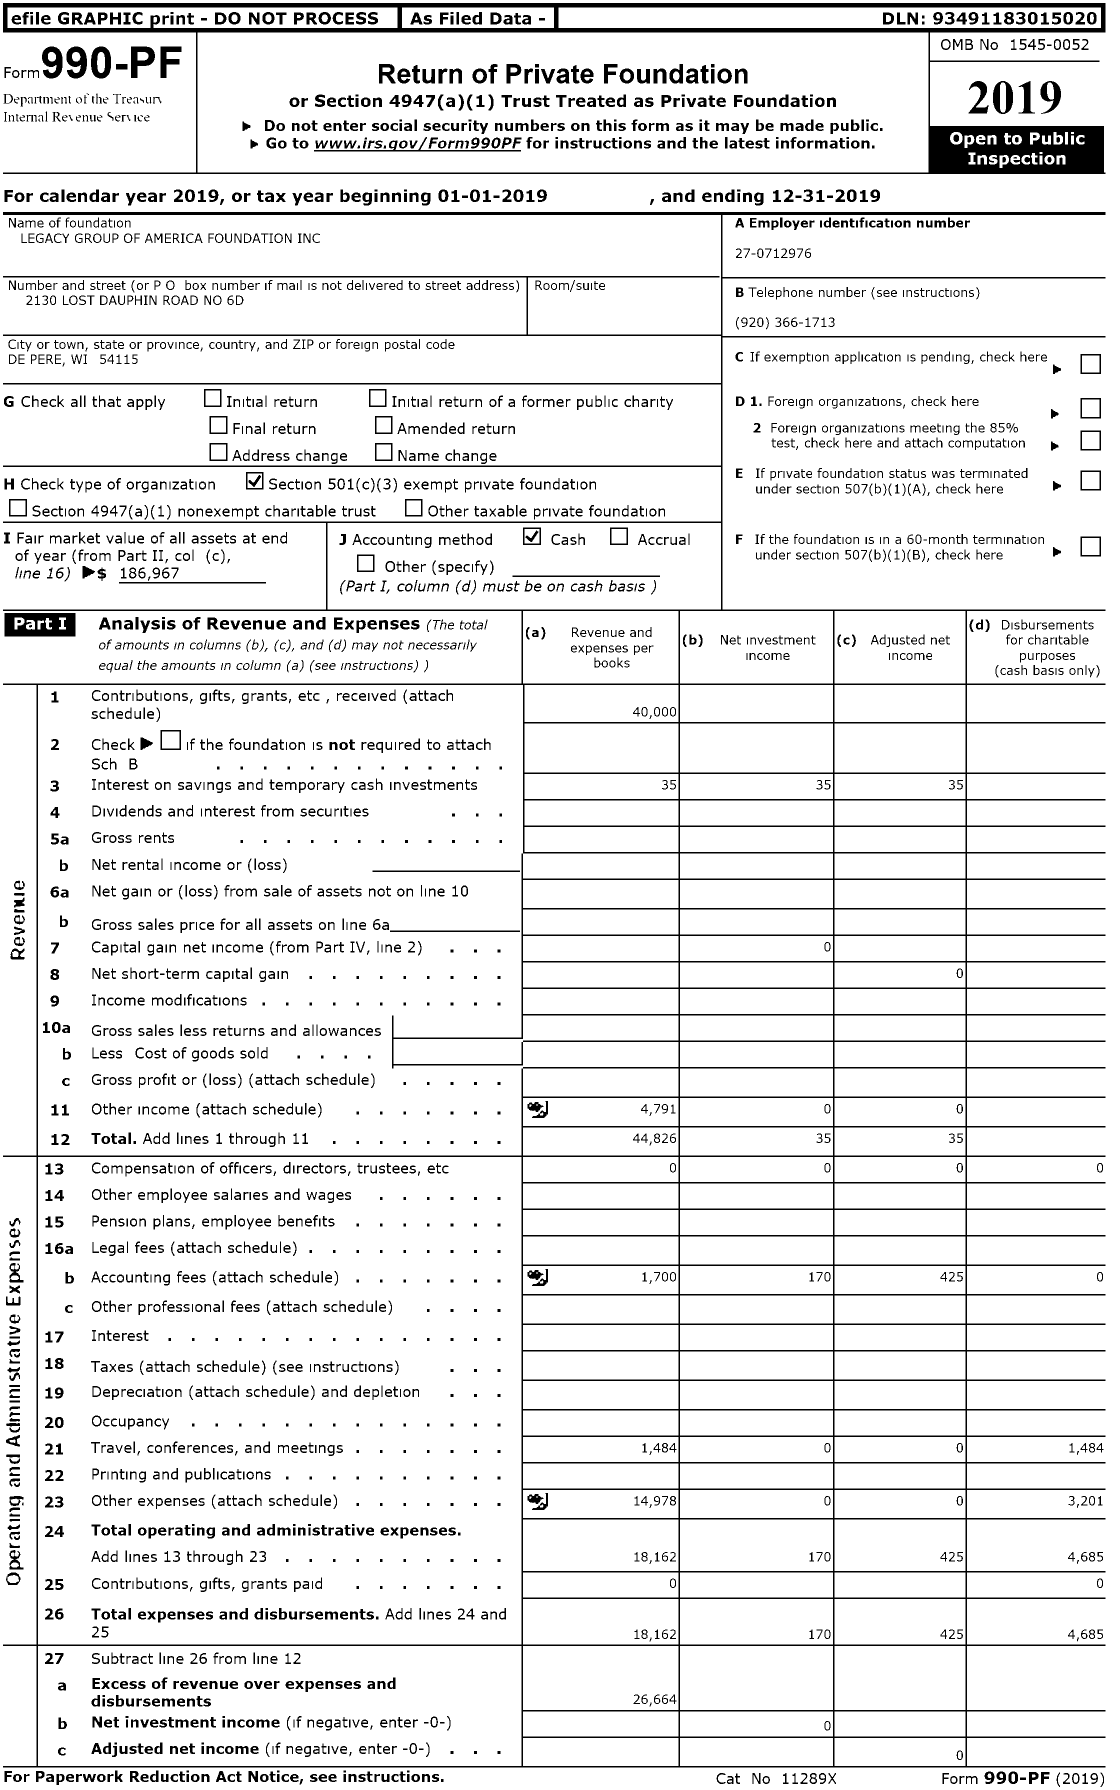 Image of first page of 2019 Form 990PR for Legacy Group of America Foundation